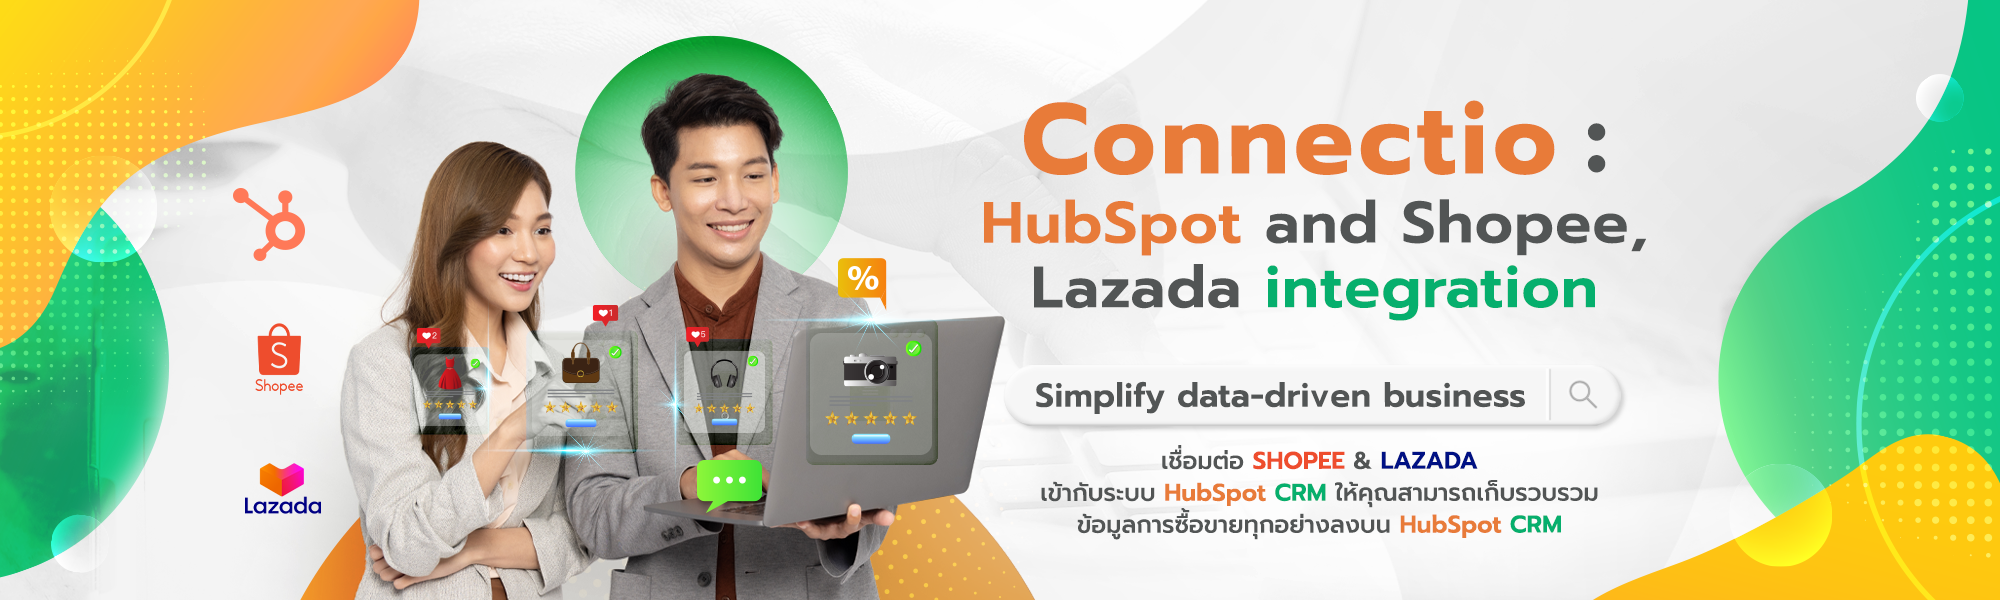 Connectio-HubSpot-and-Shopee